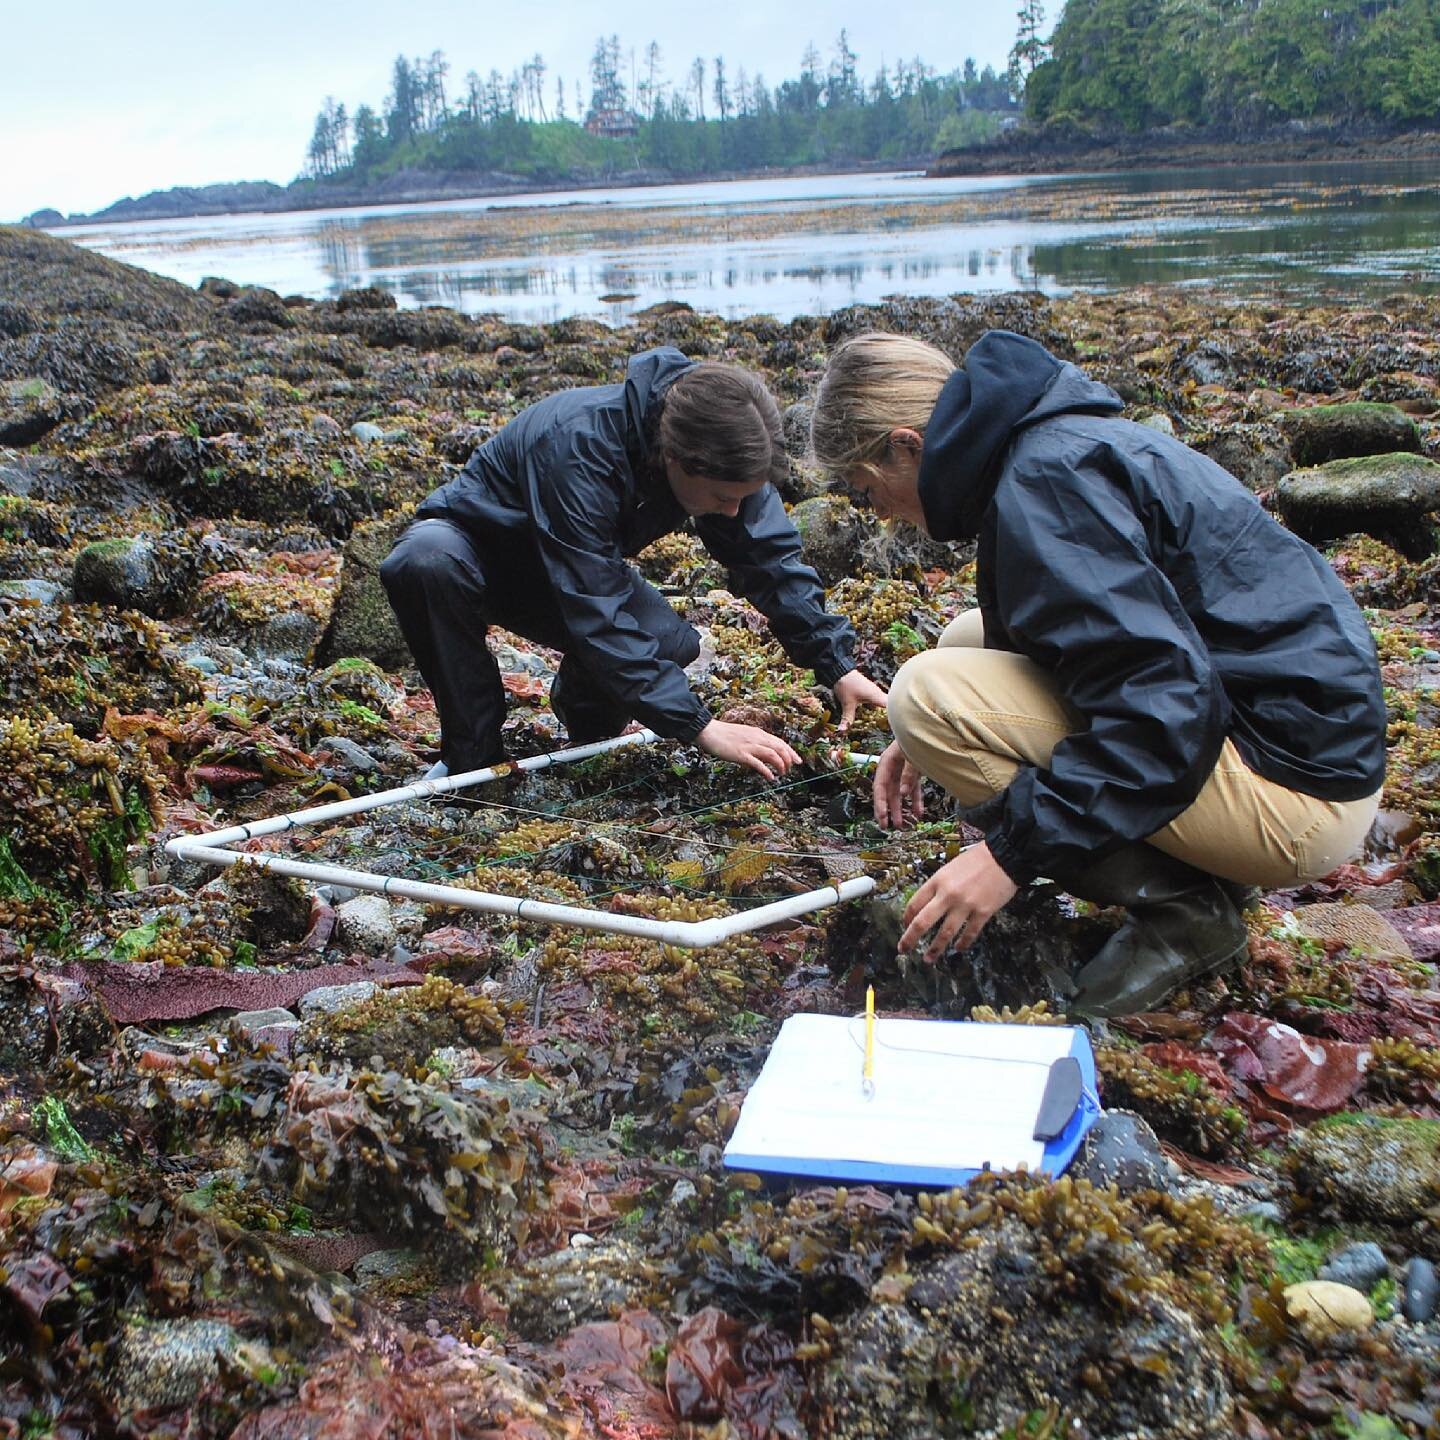 We spent the morning at Terrace Beach with the Outdoor Education class from Ucluelet Secondary School performing intertidal biodiversity transects (IBTs). We used quadrats to measure the abundance, richness, evenness and diversity of the rocky intert